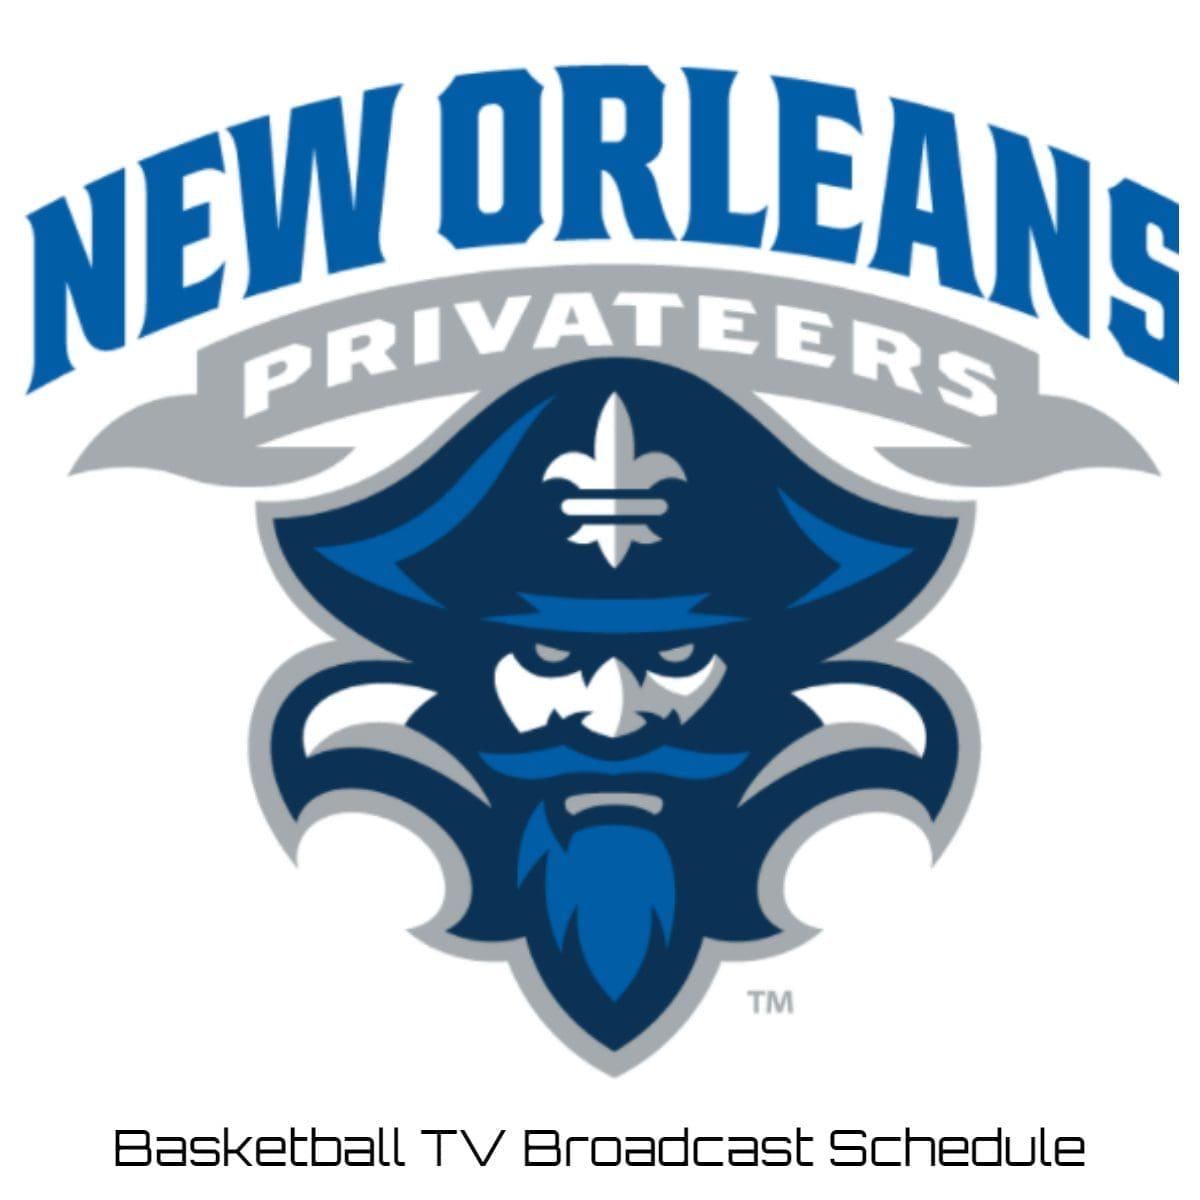 New Orleans Privateers Basketball TV Broadcast Schedule